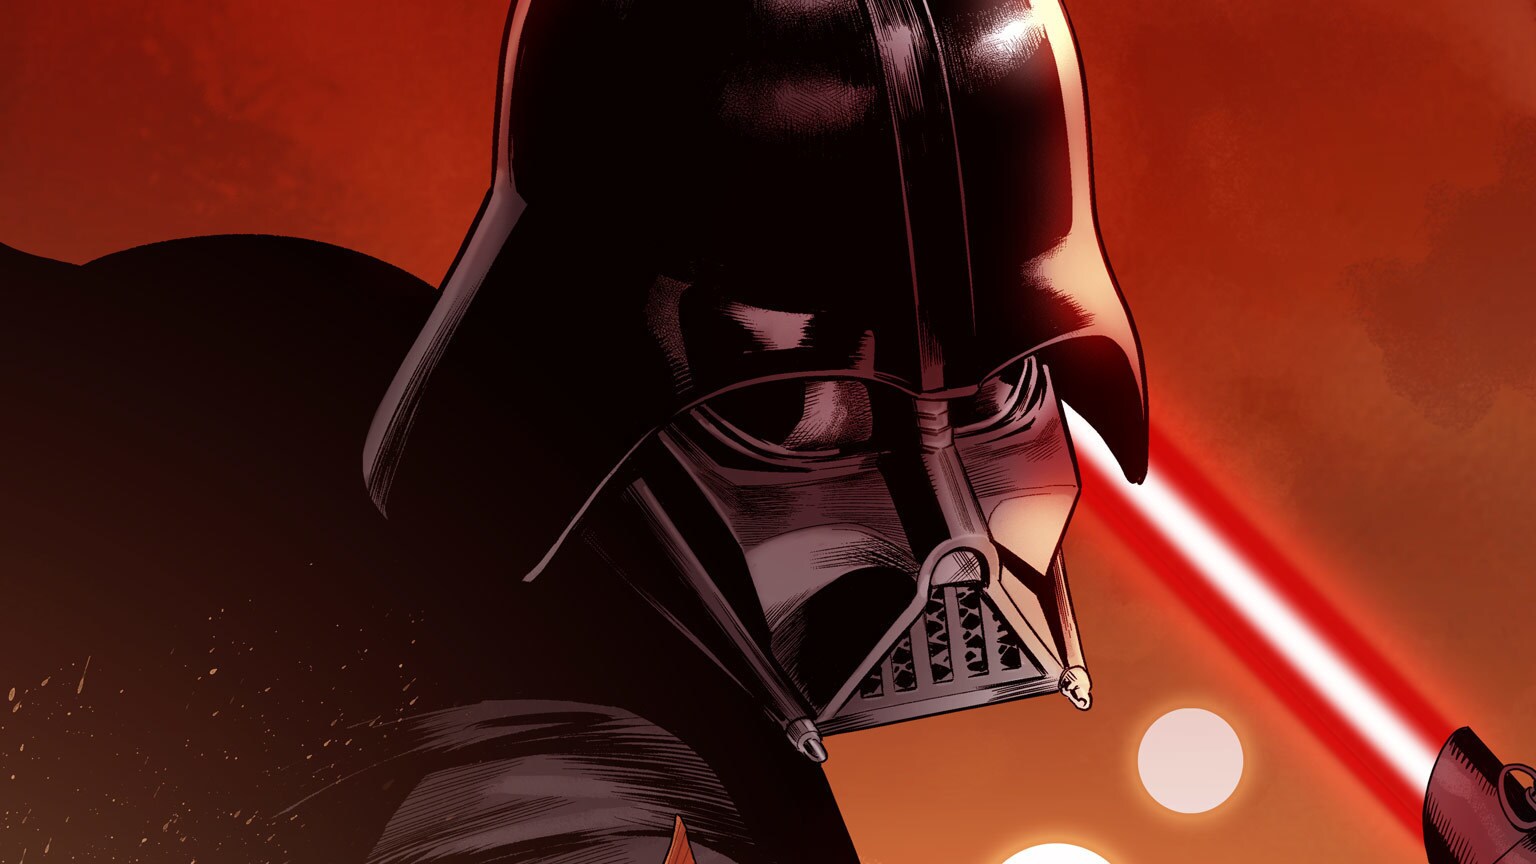 Vader Pursues His Target in Marvel’s Star Wars: Darth Vader #25 – Exclusive Preview